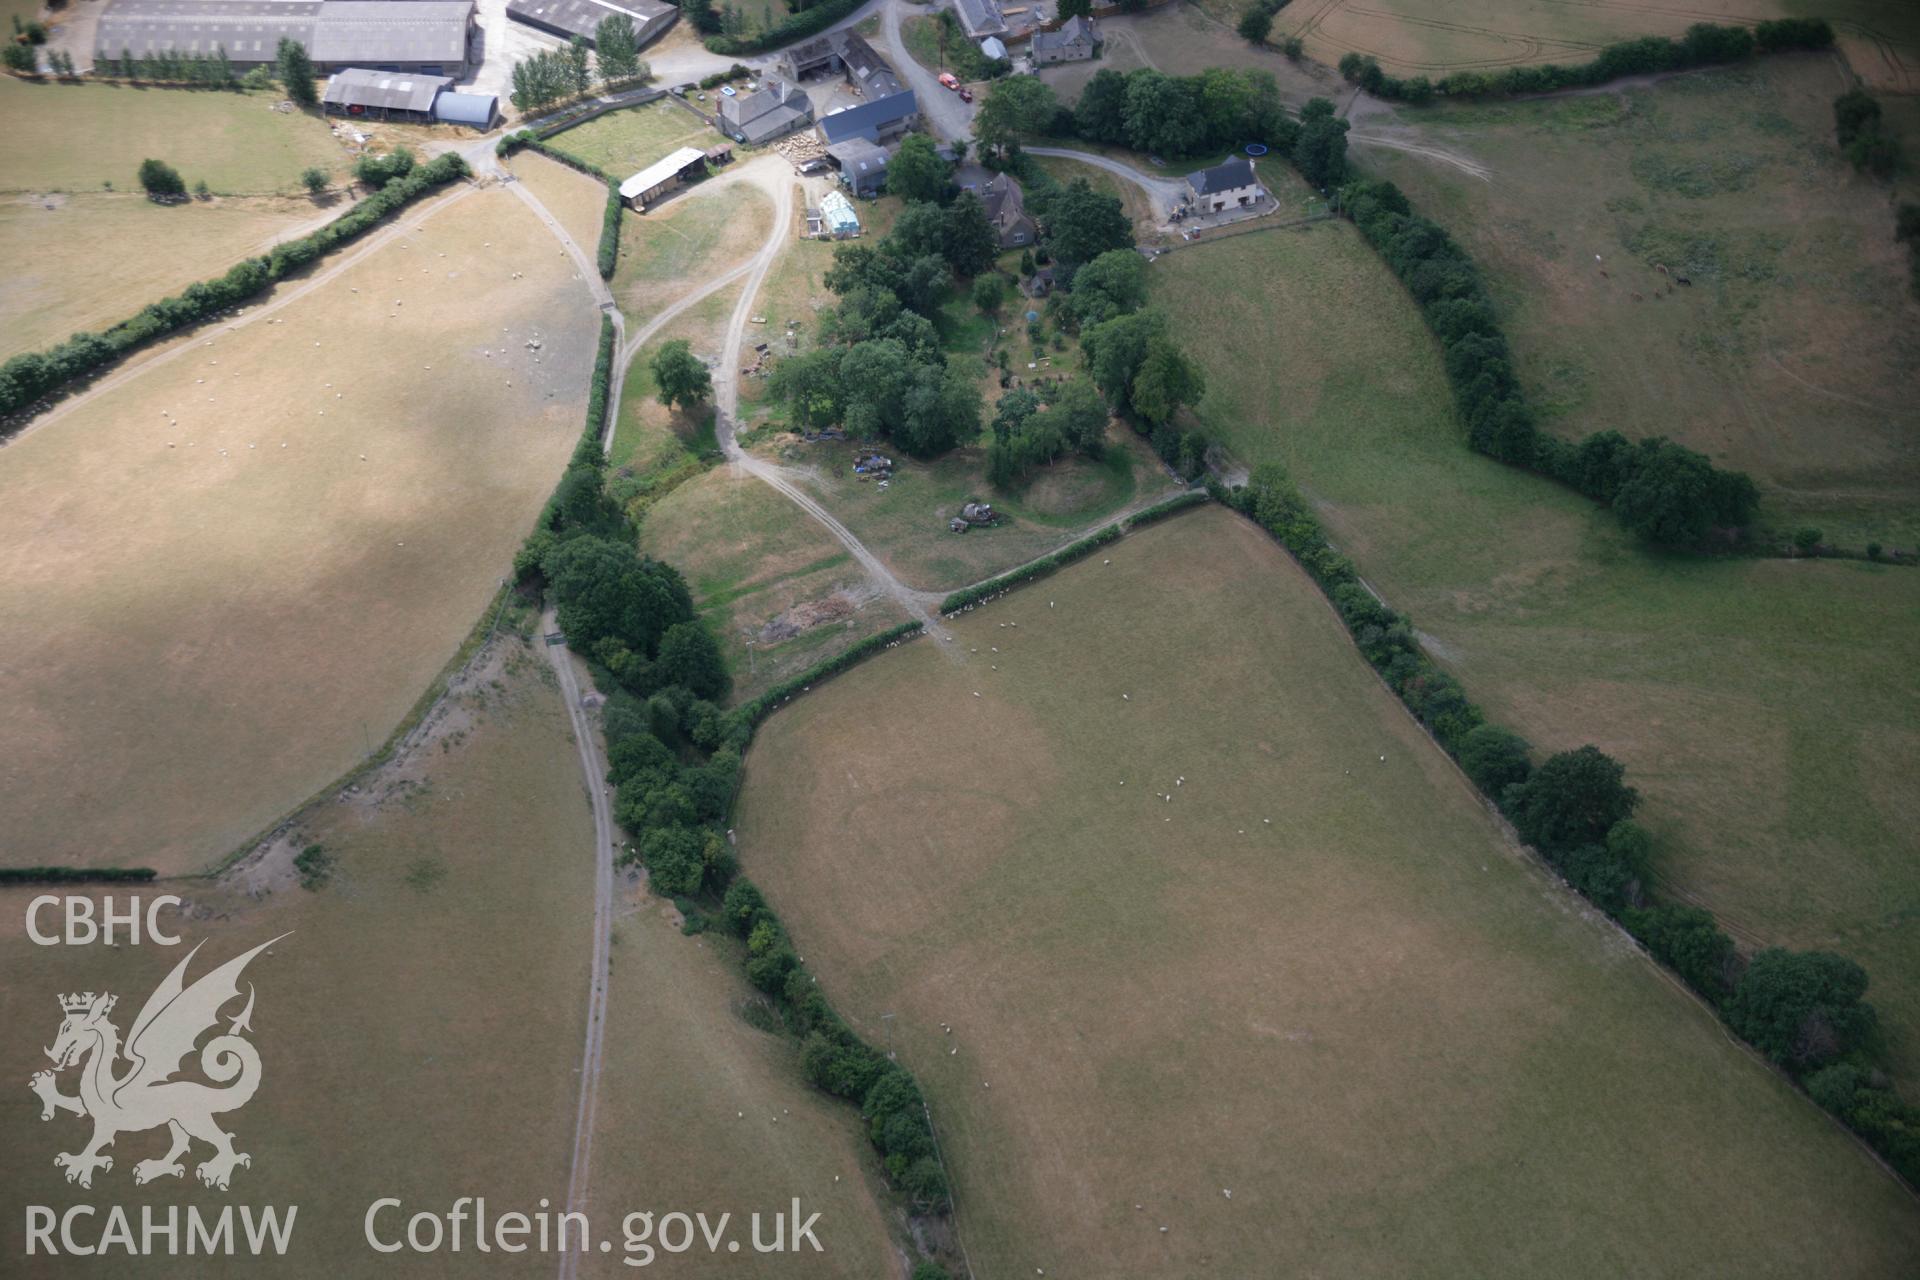 RCAHMW colour oblique aerial photograph of Dunn's Lane Motte. Taken on 27 July 2006 by Toby Driver.